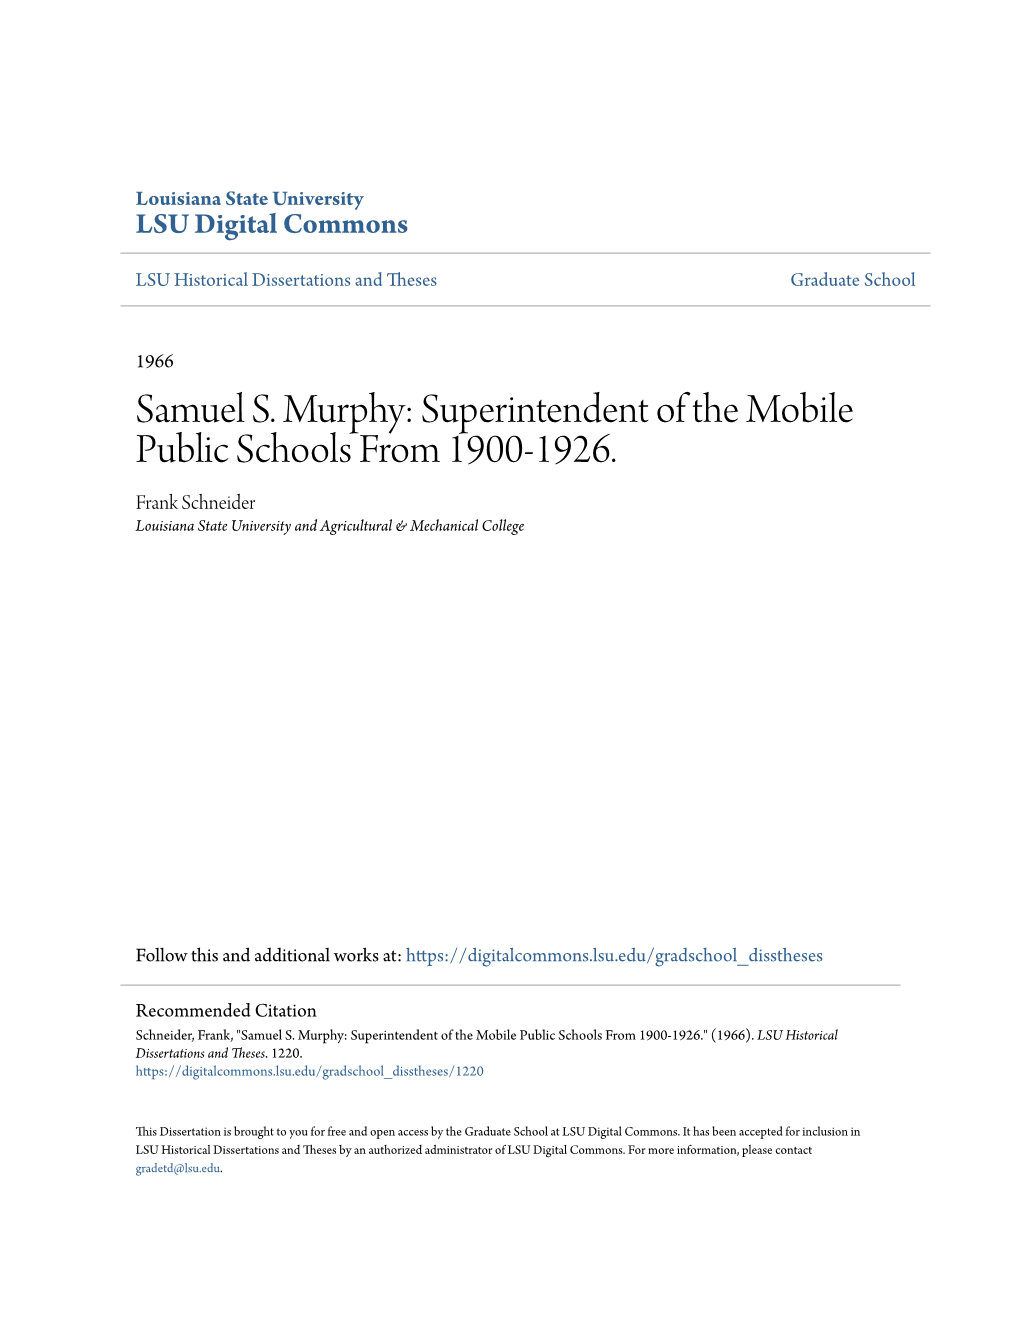 Samuel S. Murphy: Superintendent of the Mobile Public Schools from 1900-1926